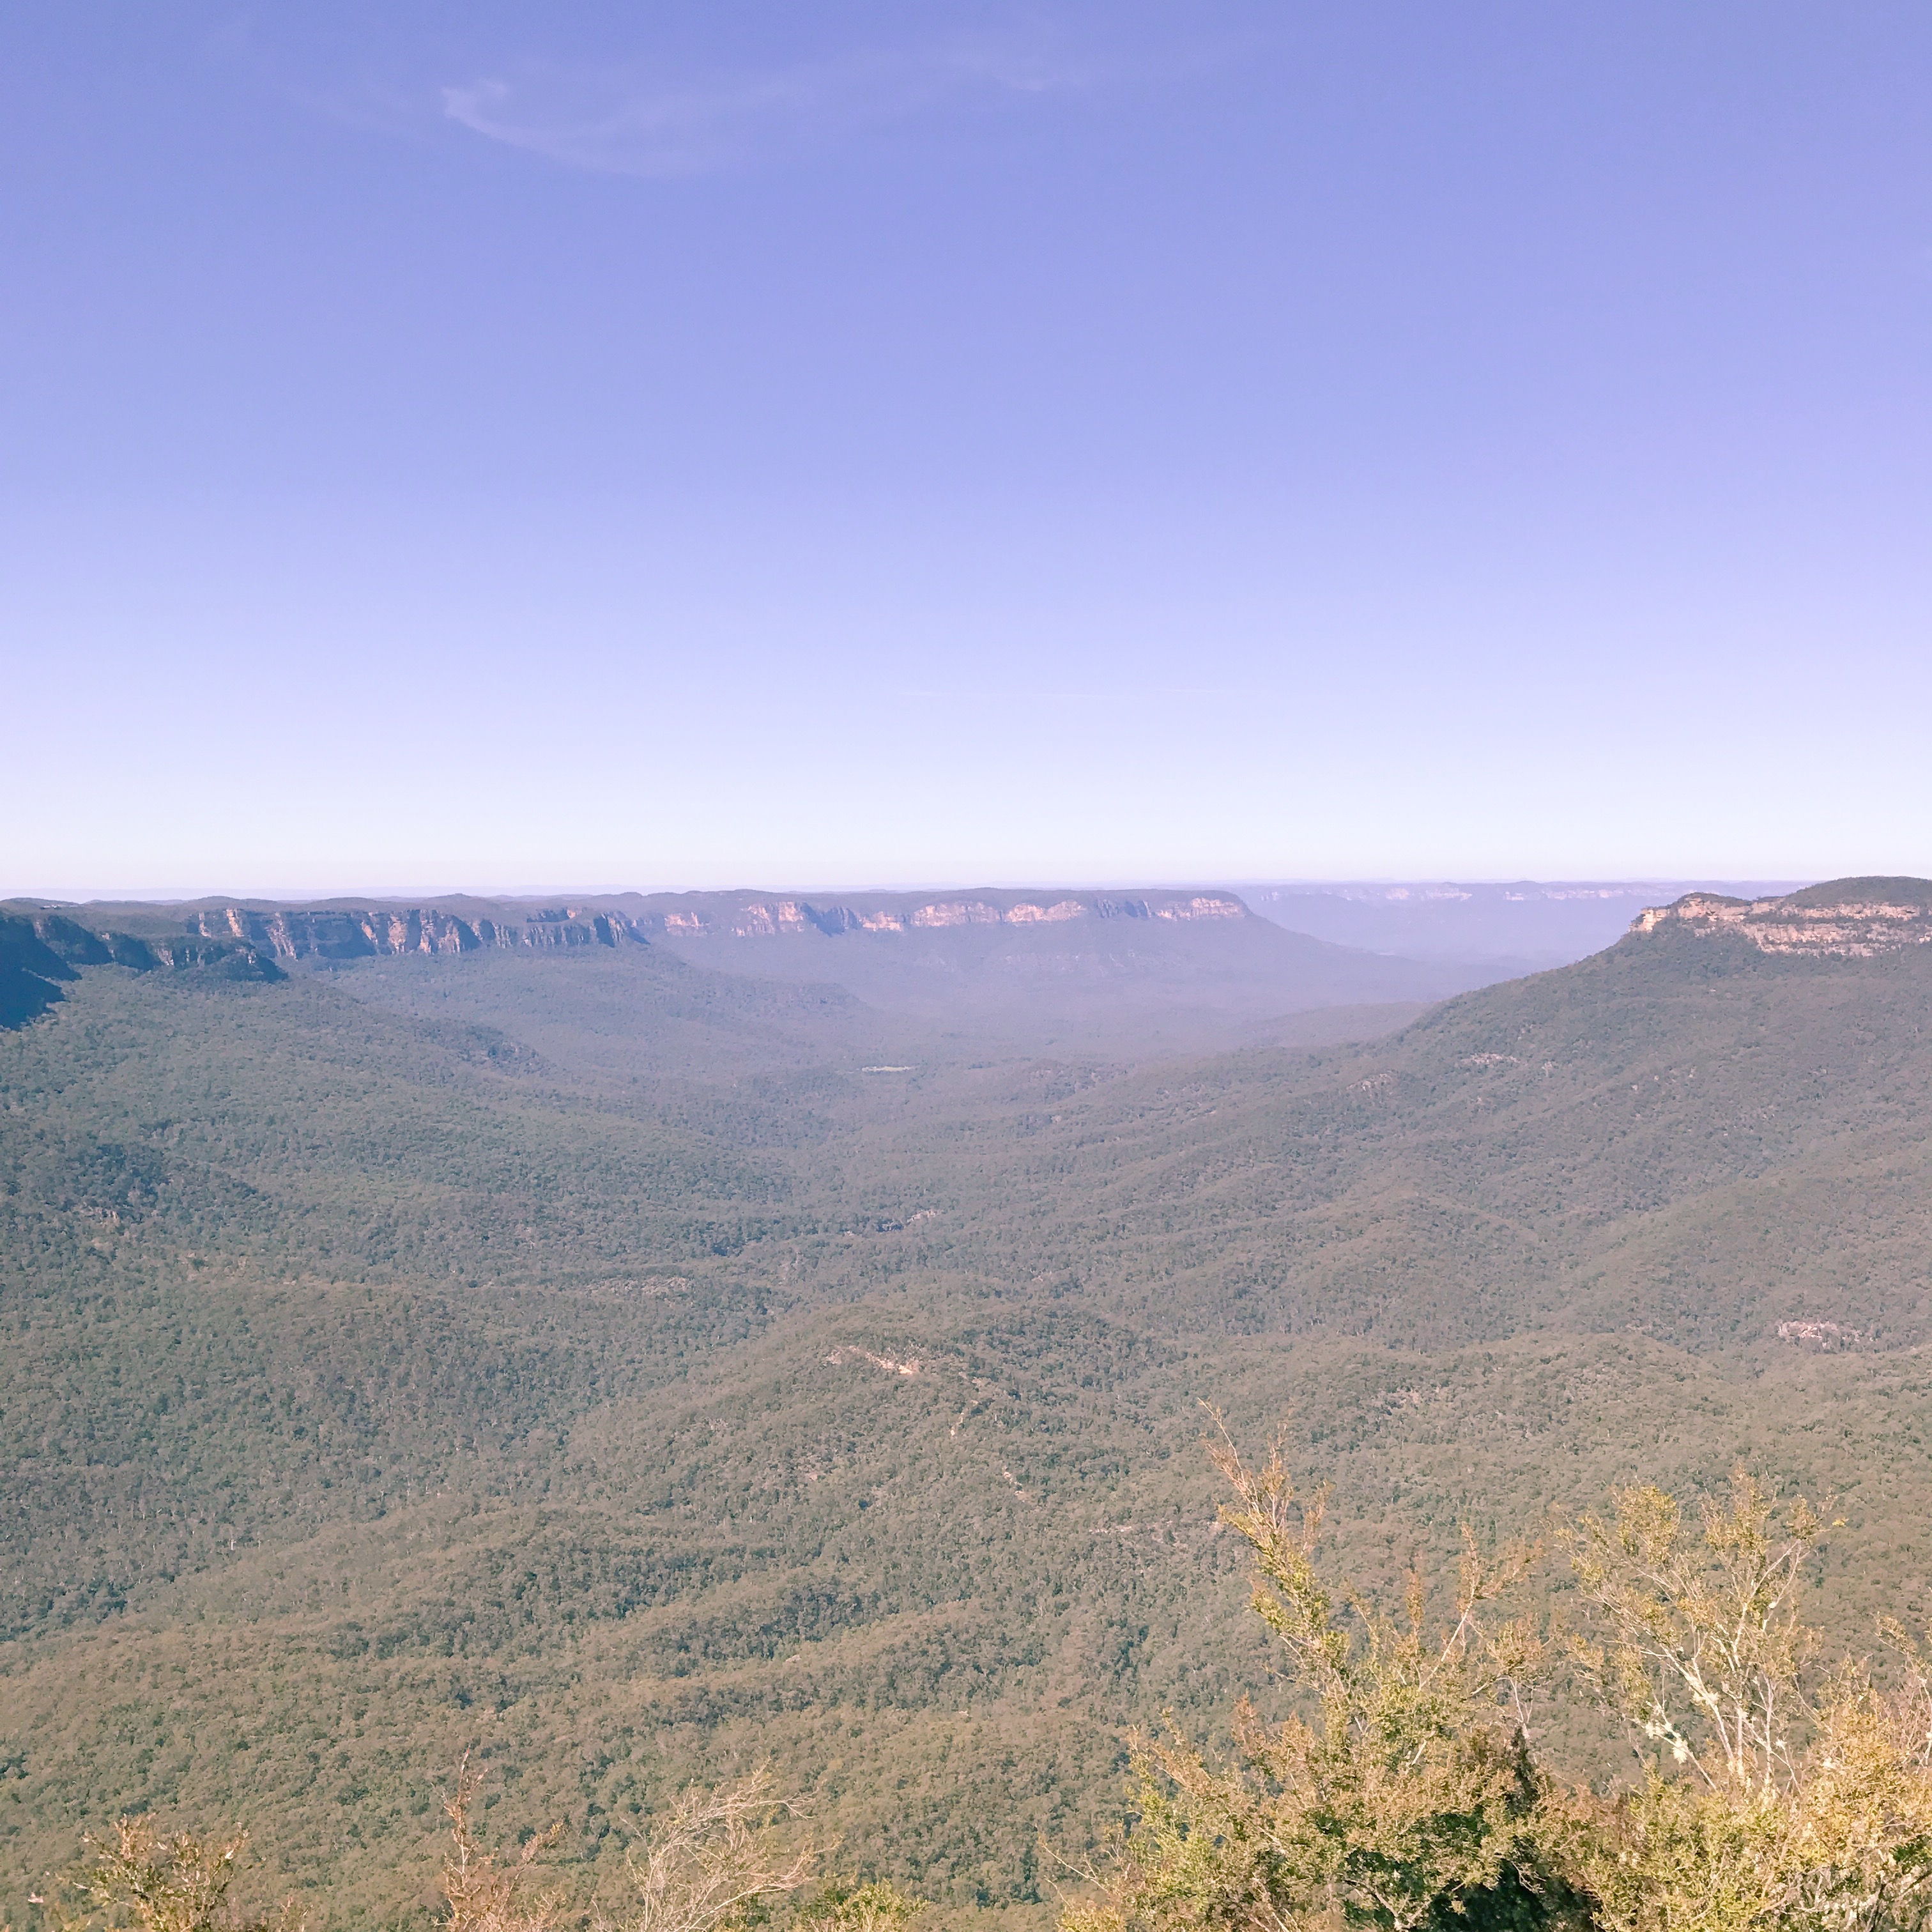 The green valley of the Blue Mountains surrounded by cliffs